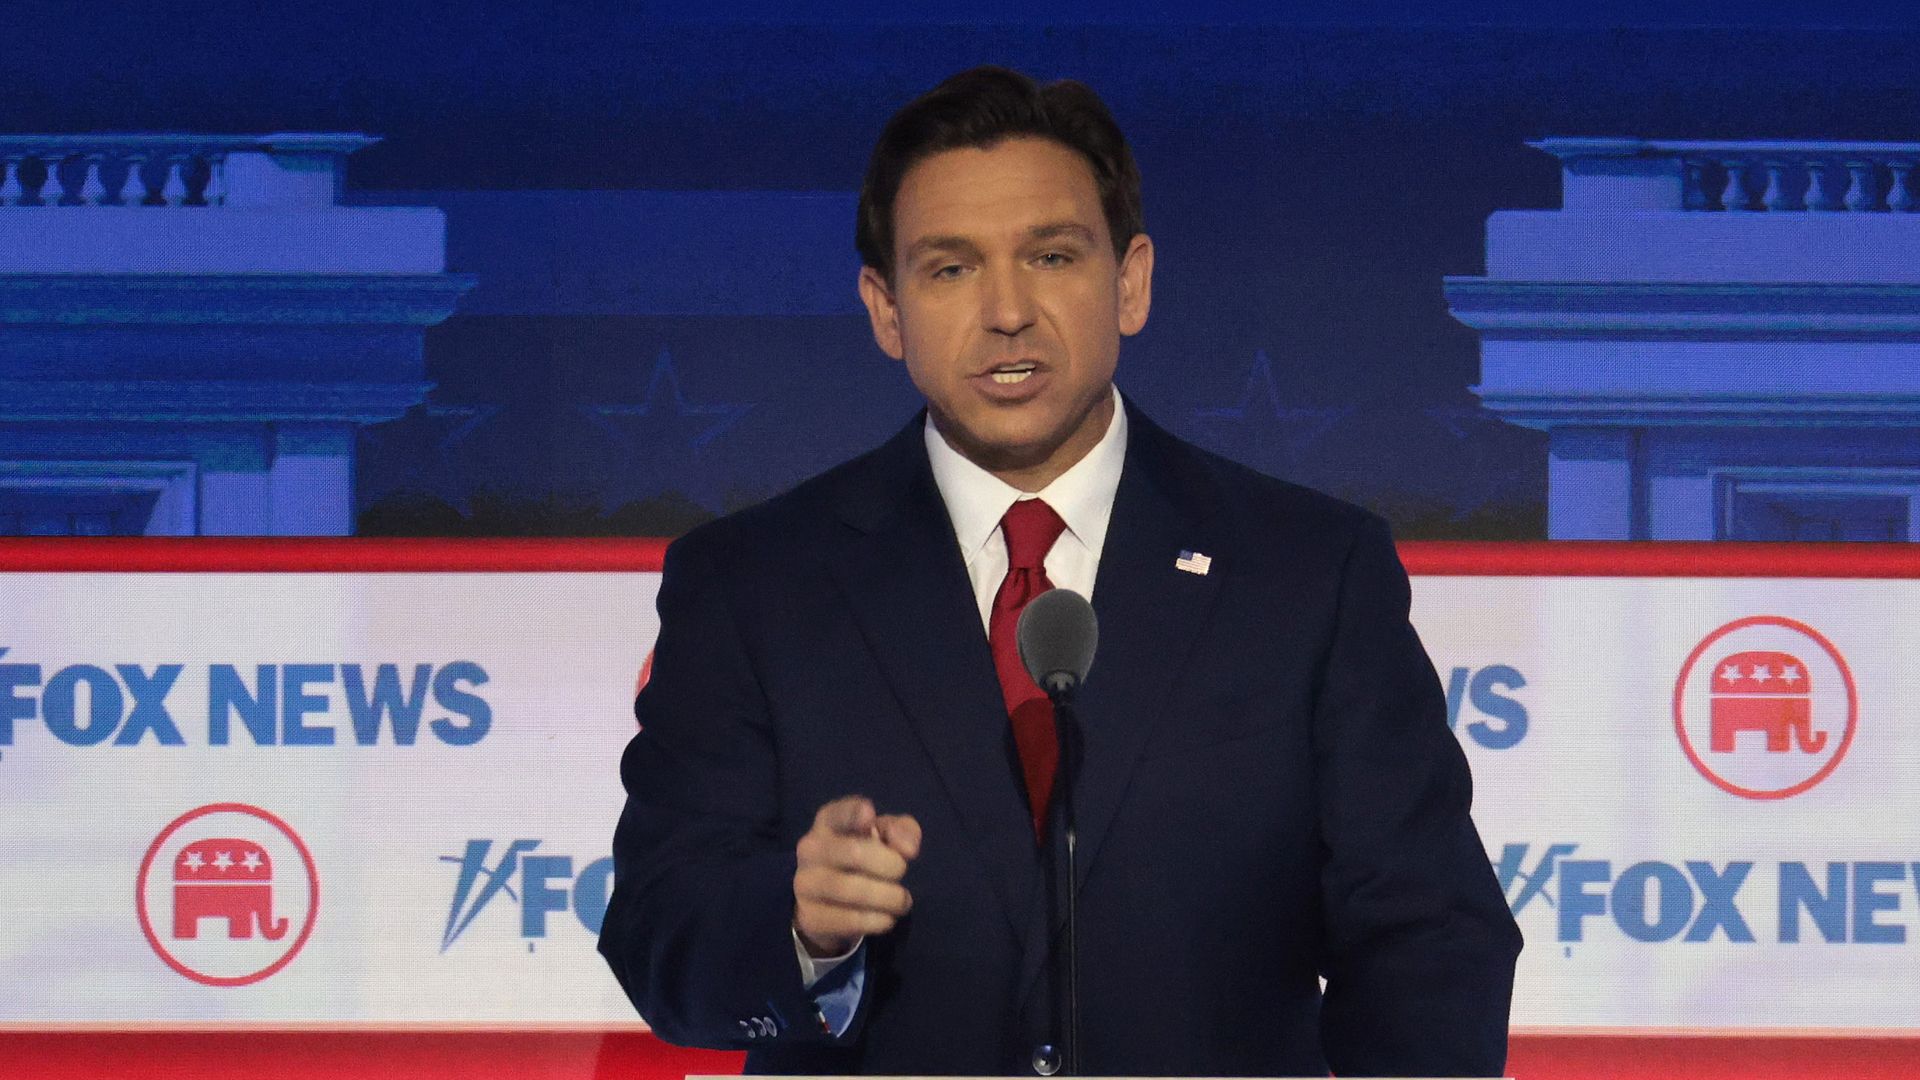 DeSantis in a blue suit and red tie in front of banners that say Fox News stands at a lectern speaking